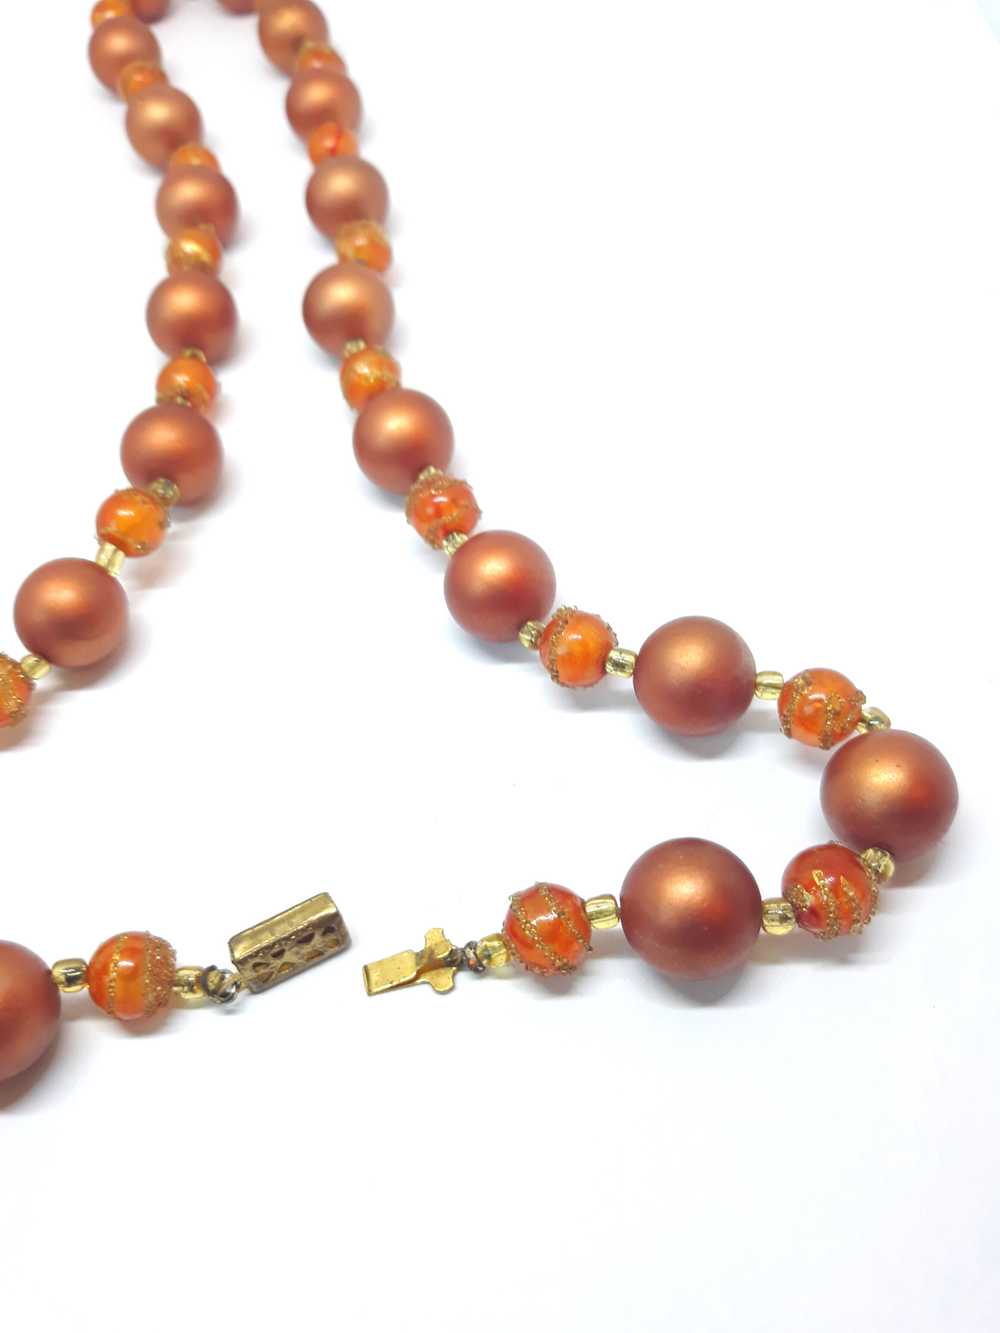 Vintage 1960s-70s Copper Beaded Necklace - image 4